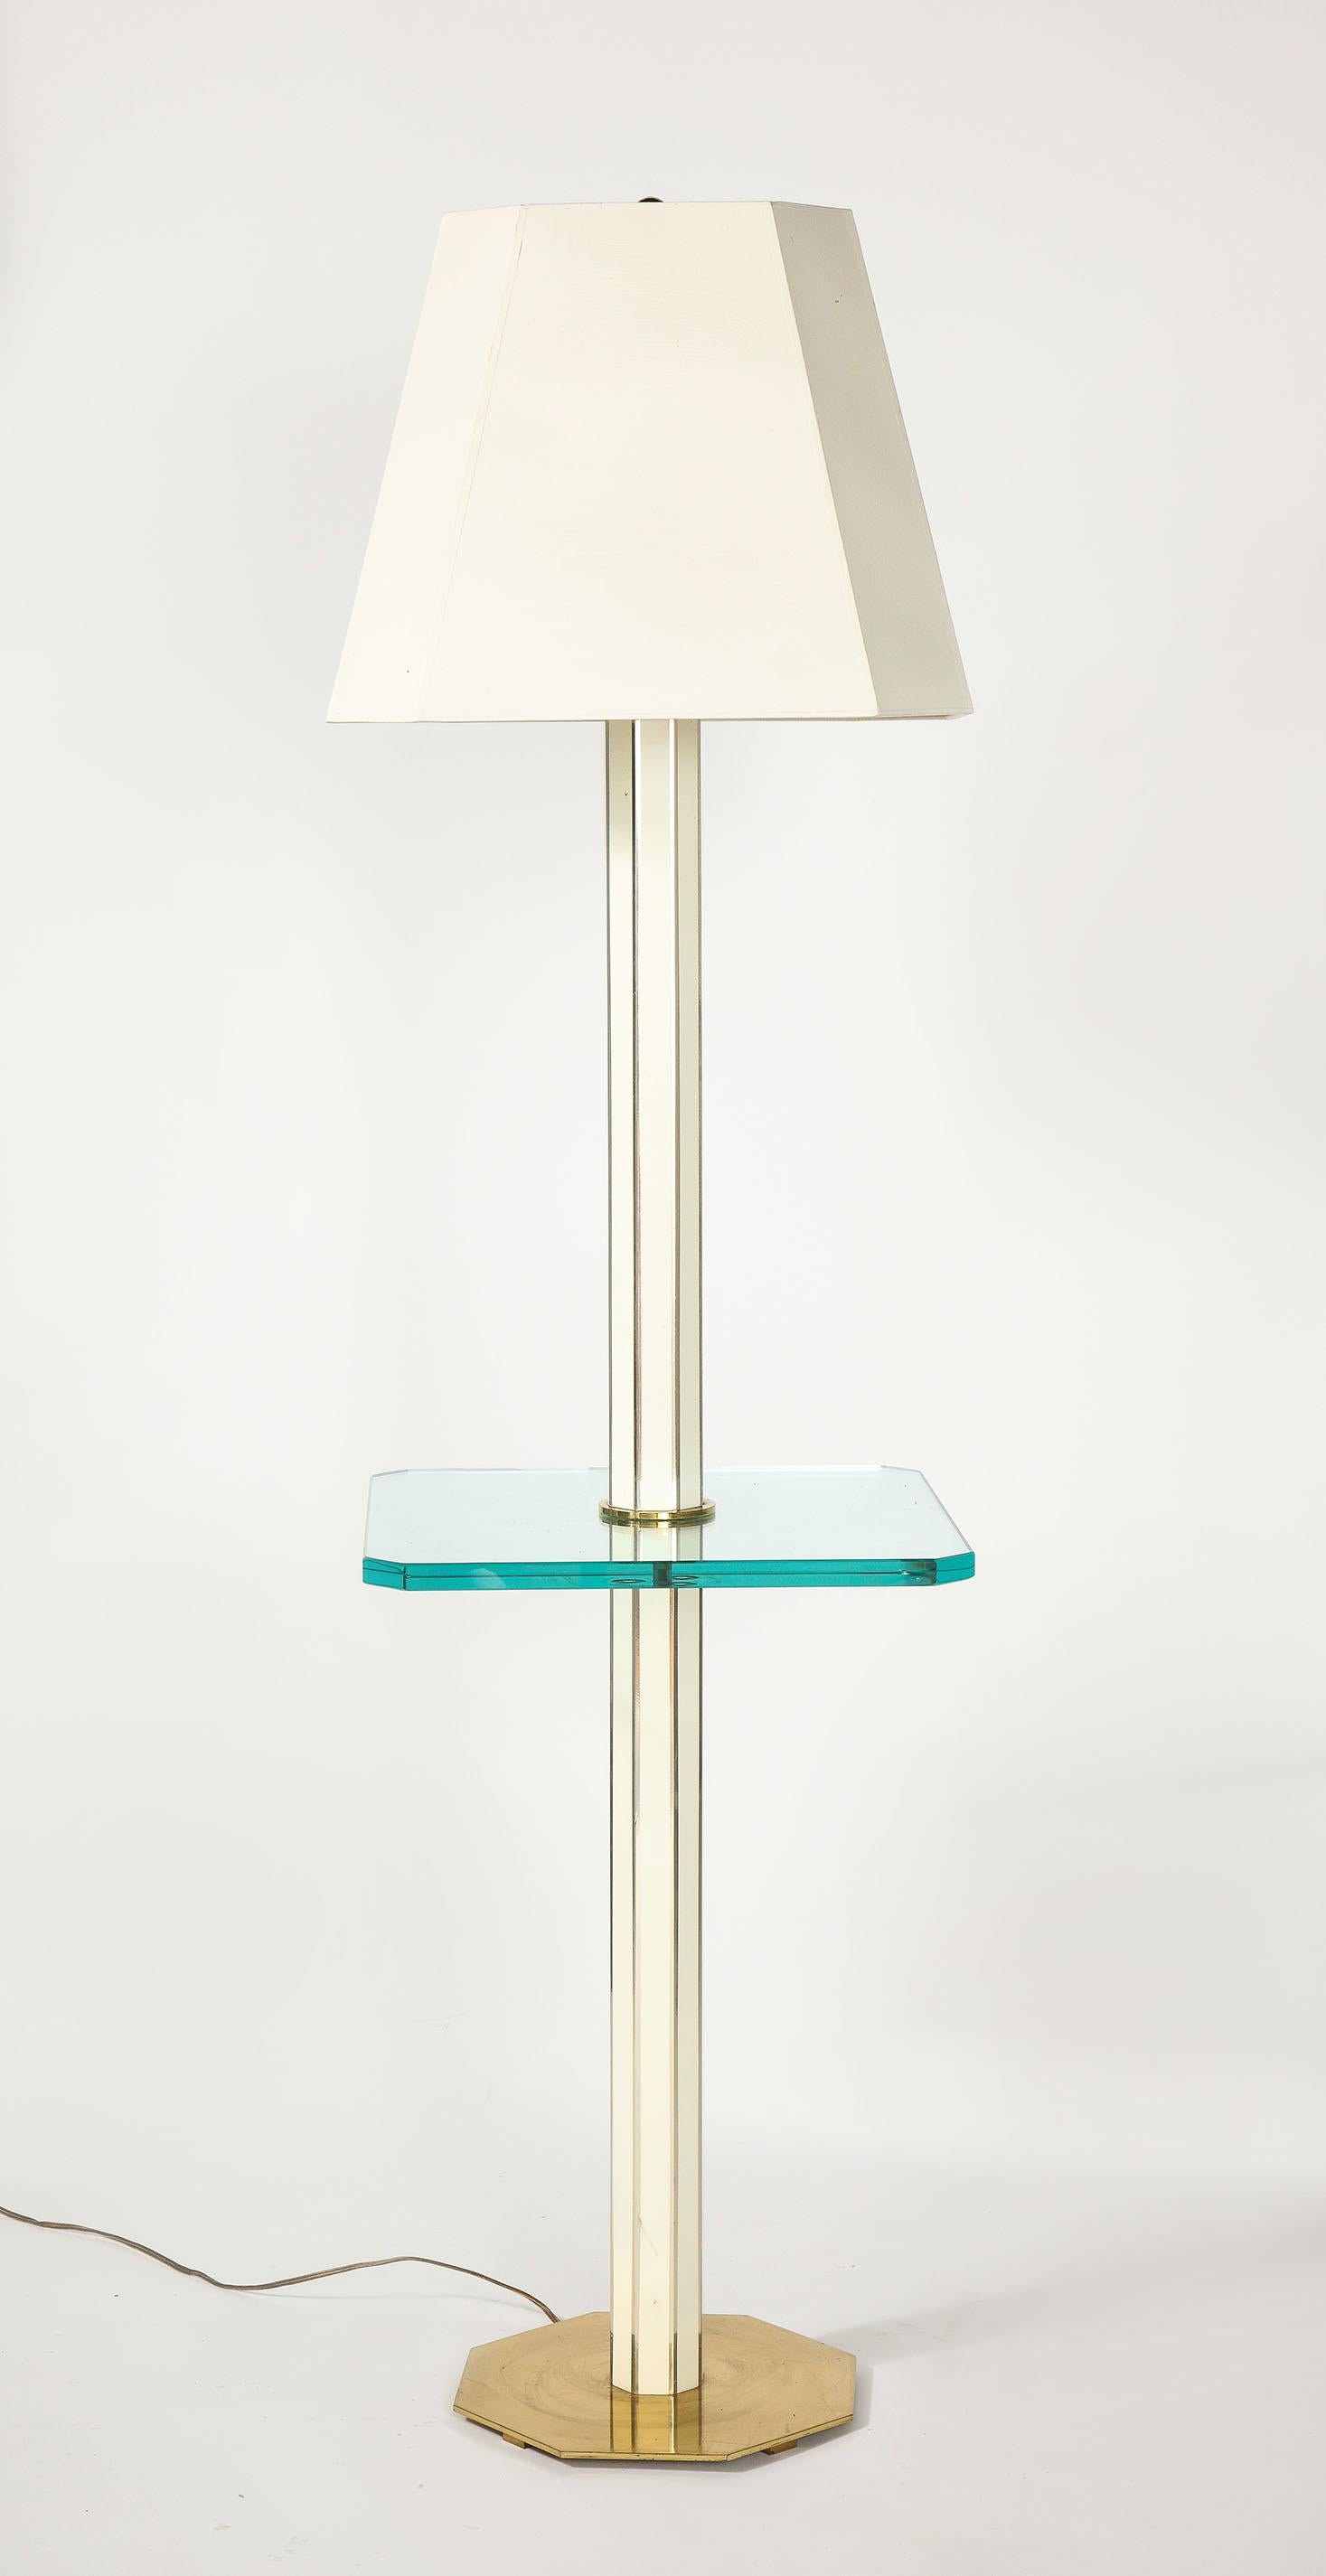 Floor lamps with lacquered wood and glass shelf brass base.